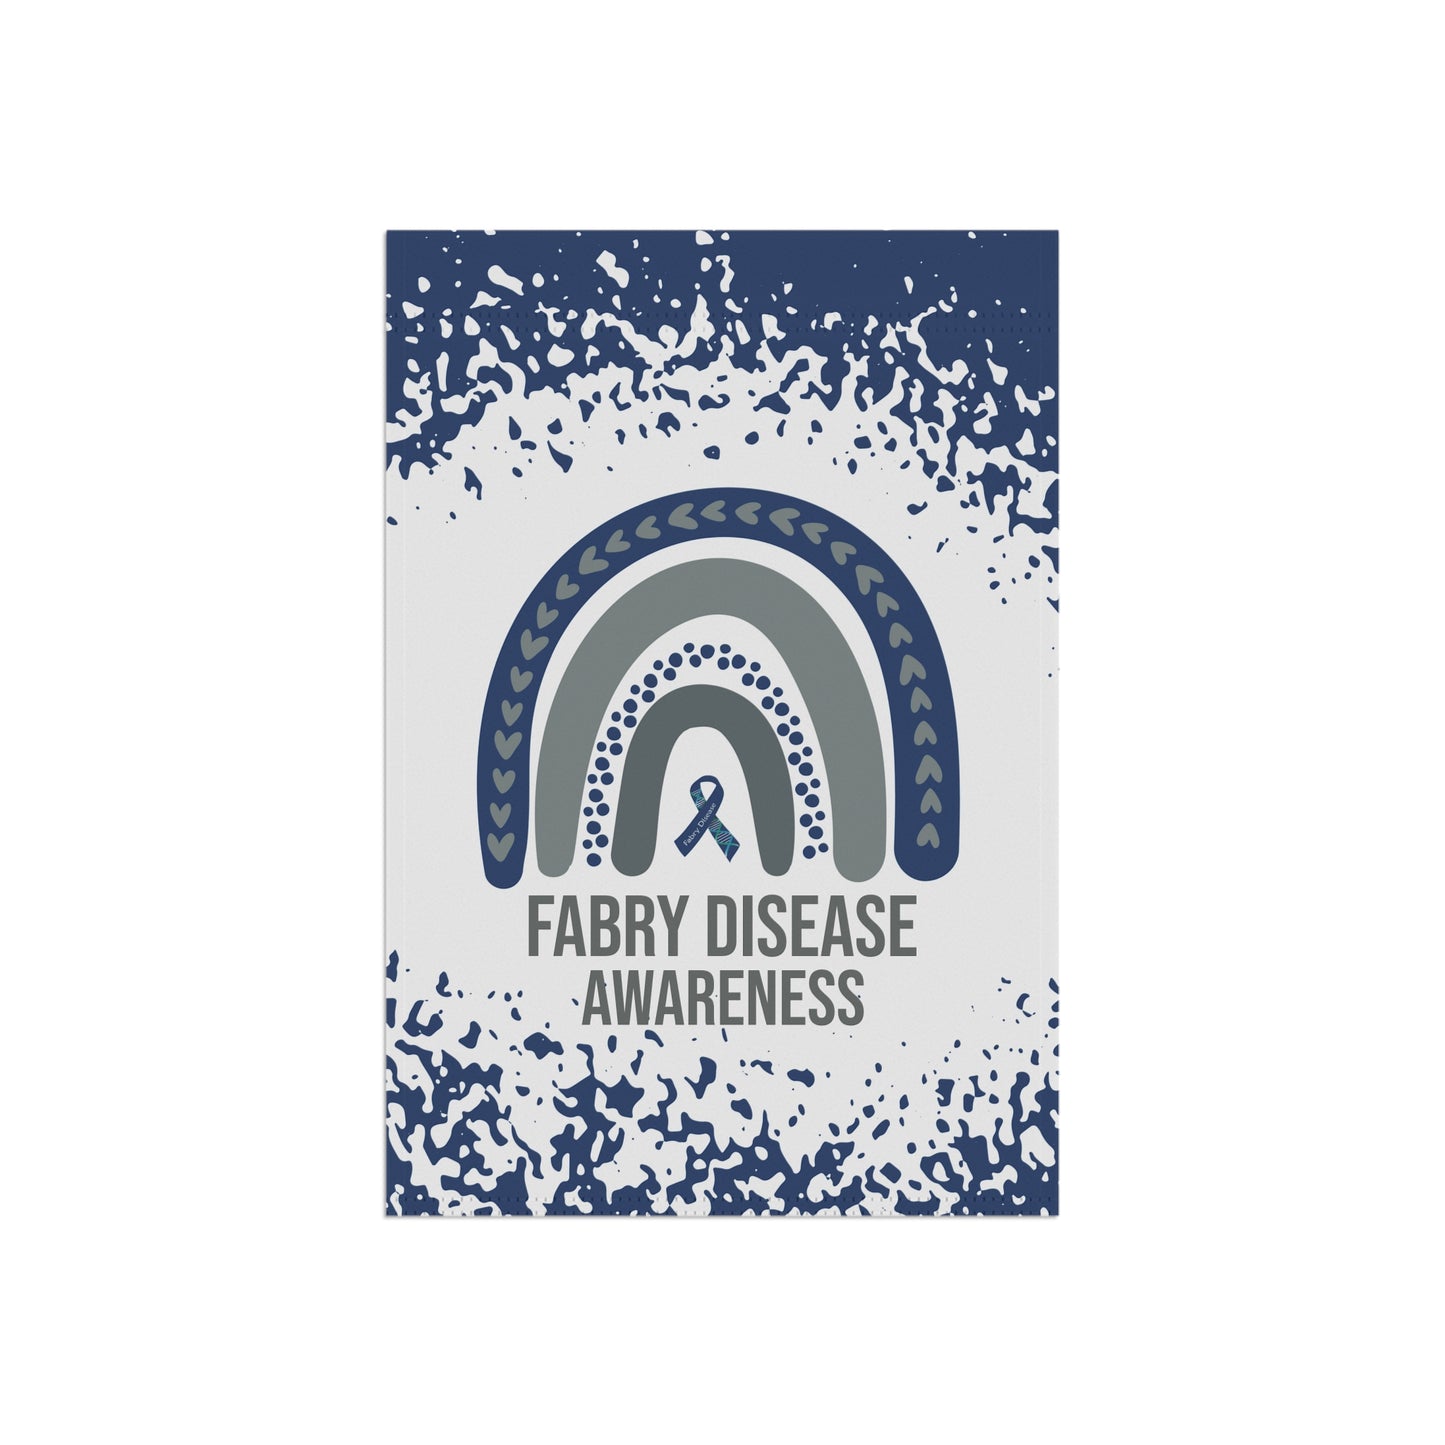 Fabry Disease Awareness Garden Flag | Welcome Sign |  New Home | Decorative House Banner | Blue Awareness Ribbon  | Support